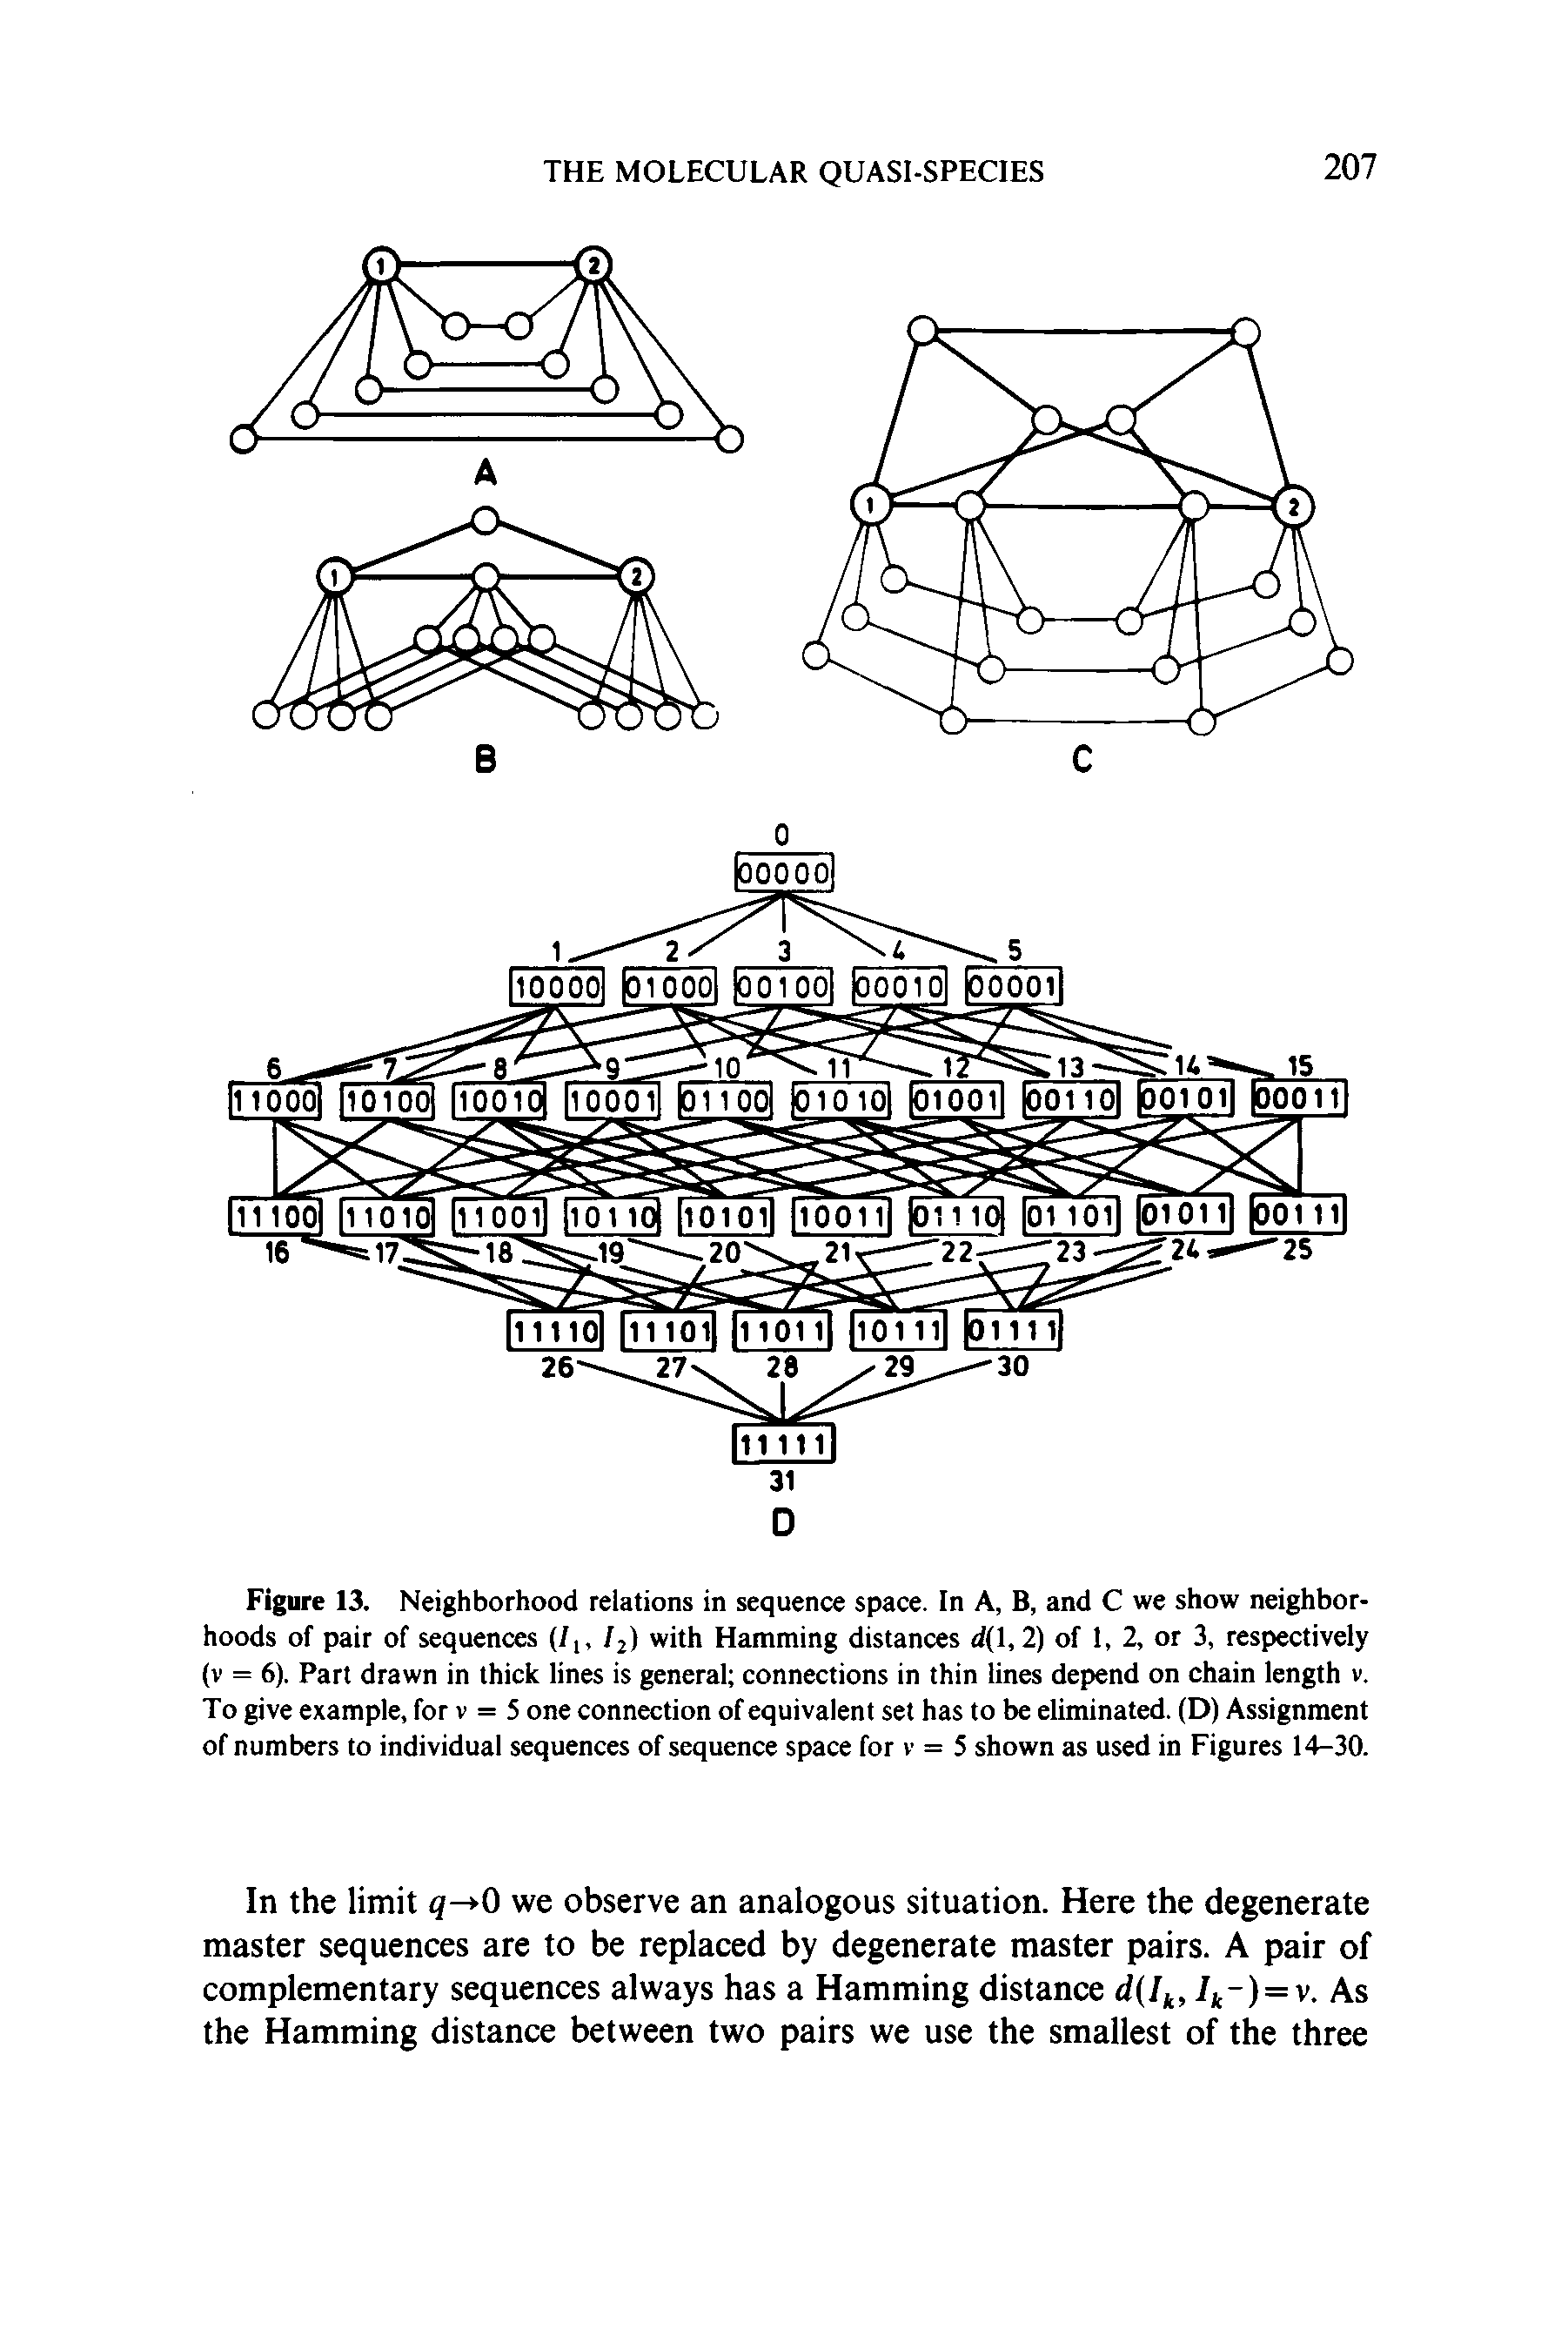 Figure 13. Neighborhood relations in sequence space. In A, B, and C we show neighborhoods of pair of sequences (/[, 12) with Hamming distances d(l, 2) of 1, 2, or 3, respectively (v = 6). Part drawn in thick lines is general connections in thin lines depend on chain length v. To give example, for v = 5 one connection of equivalent set has to be eliminated. (D) Assignment of numbers to individual sequences of sequence space for v = 5 shown as used in Figures 14-30.